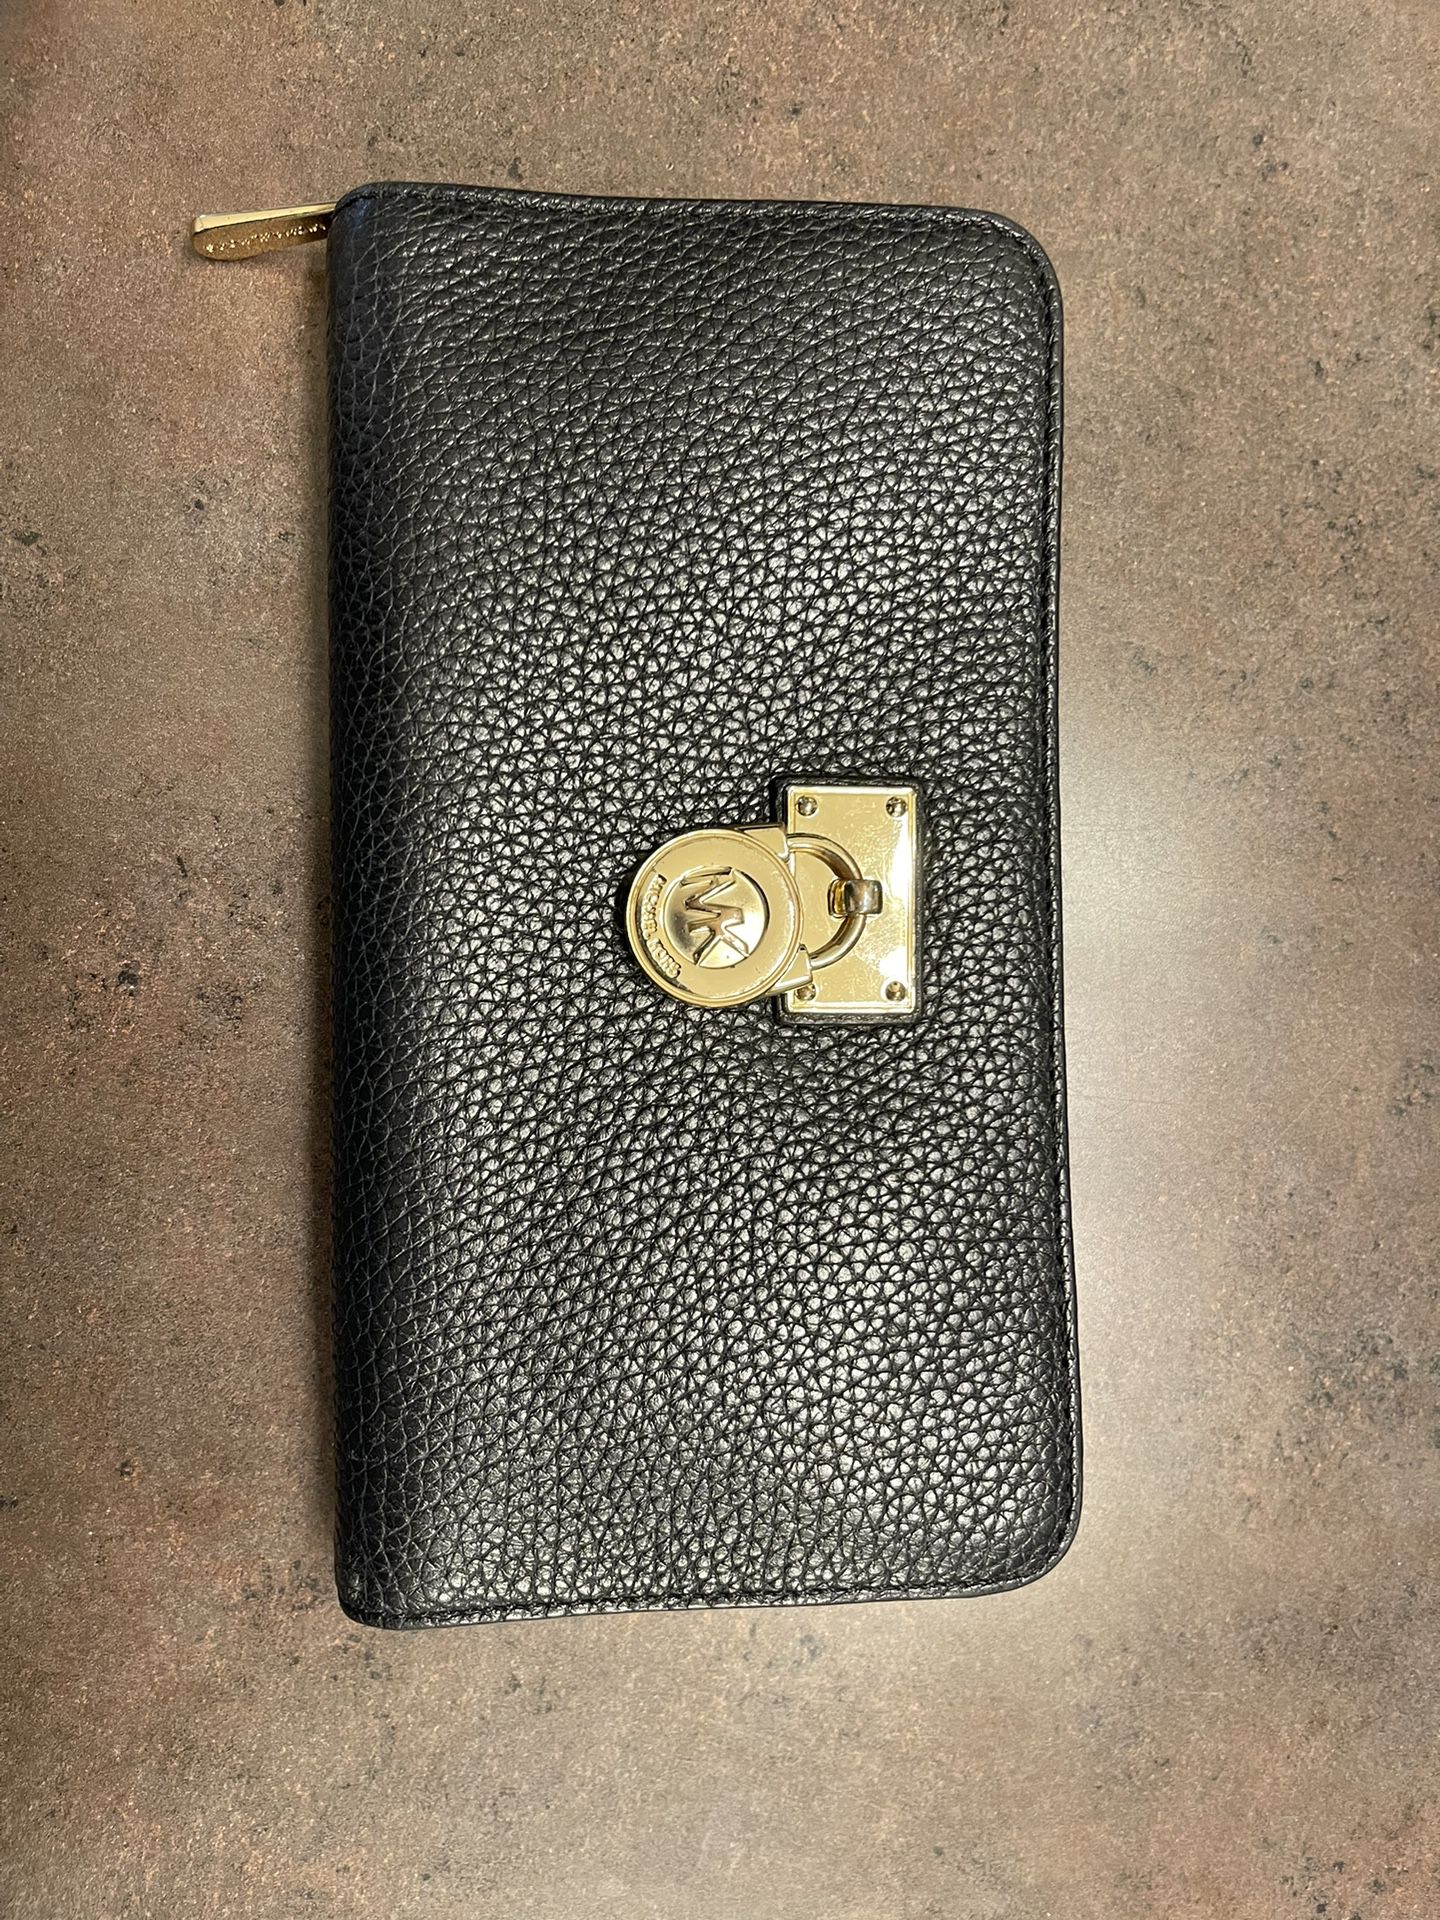 Used Michael Kors Black Wallet for Sale in Grand Terrace, CA - OfferUp